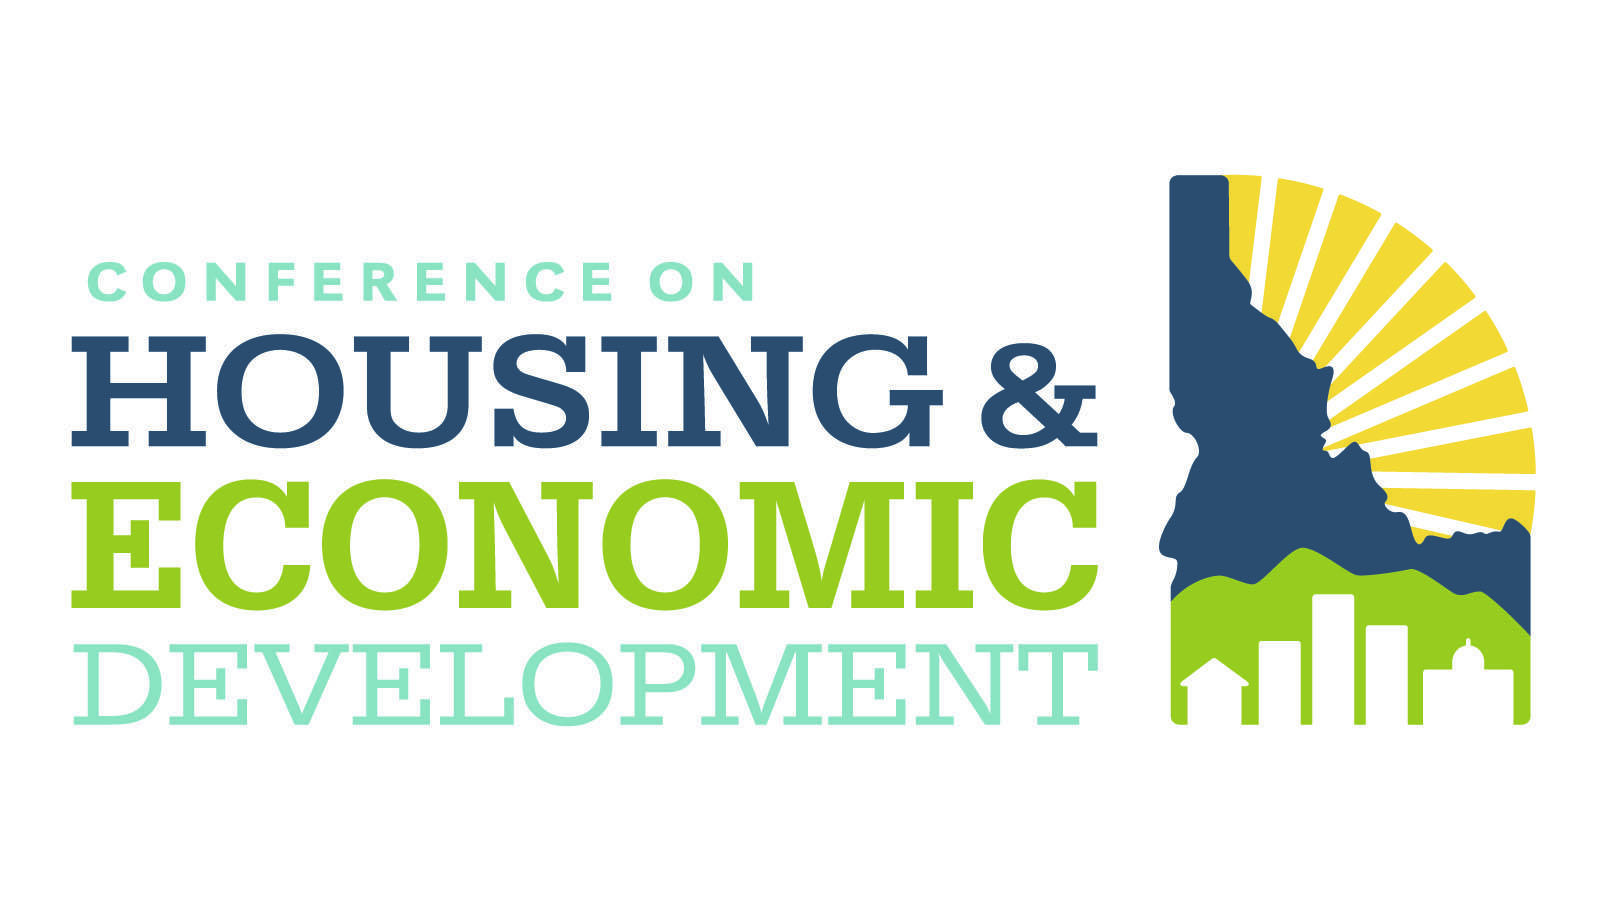 CONFERENCE ON HOUSING & ECONOMIC DEVELOPMENT - March 2-3, 2020